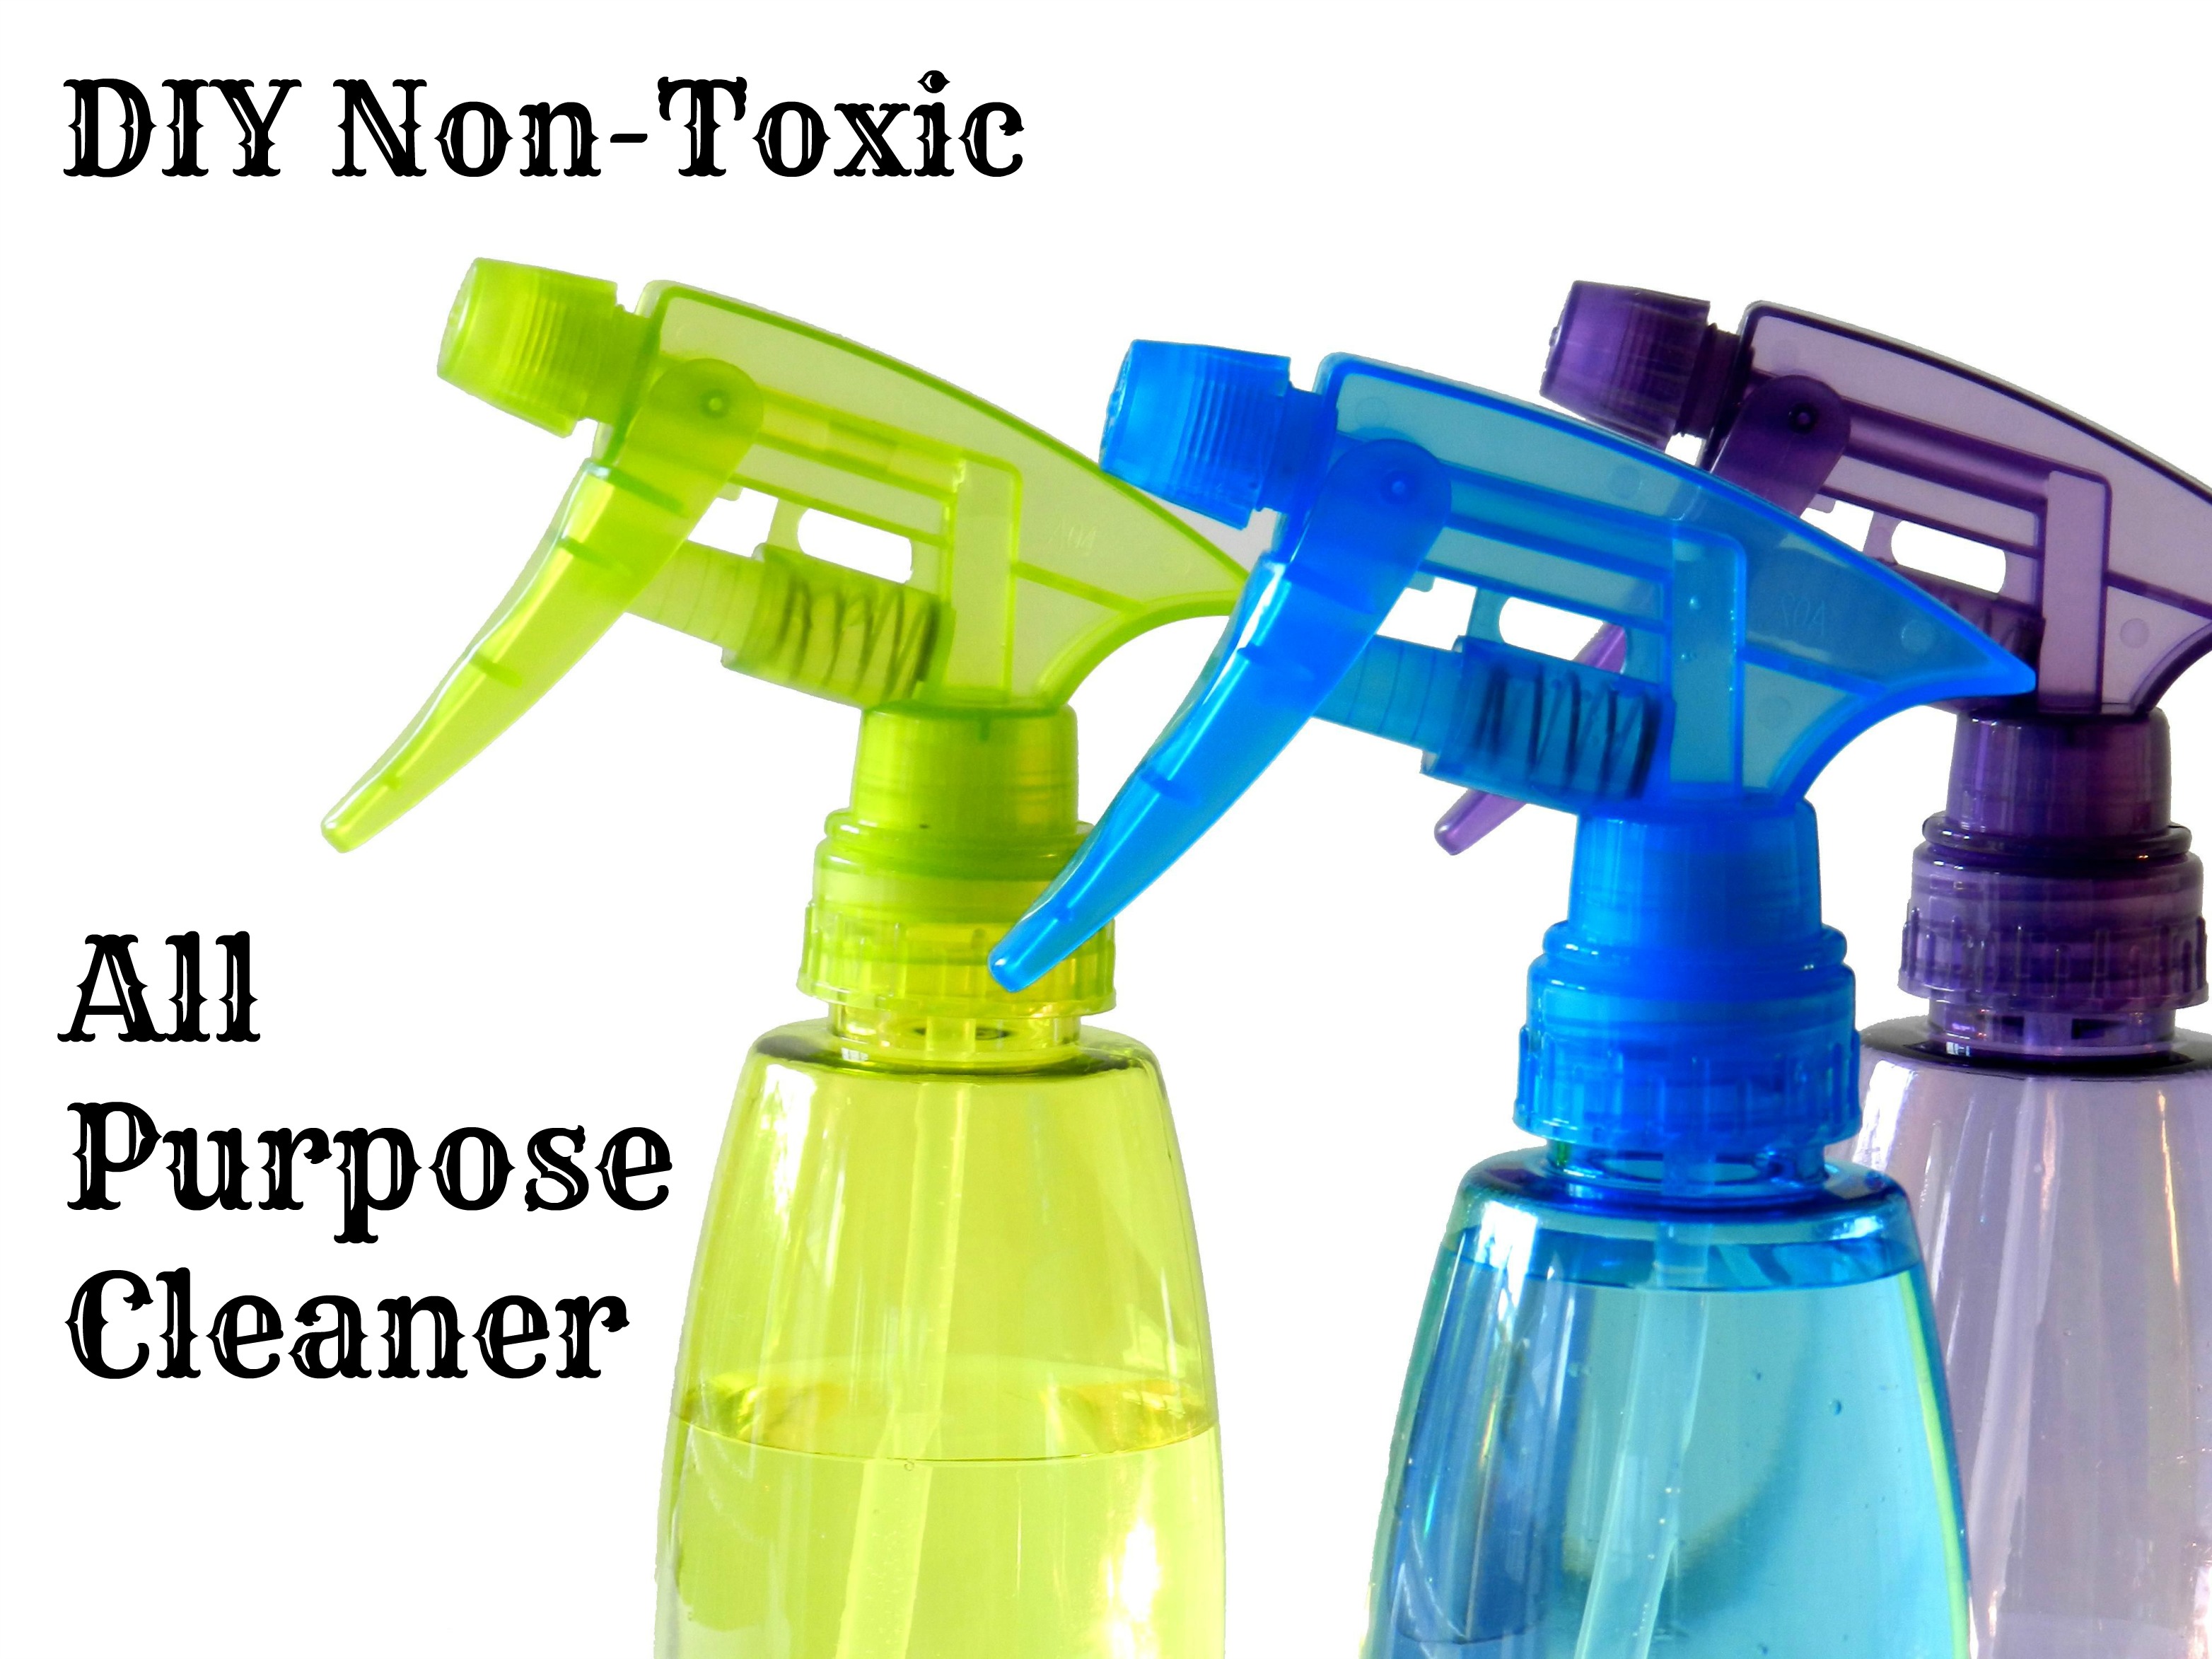 DIY Non-Toxic All Purpose Cleaner in a Jiff